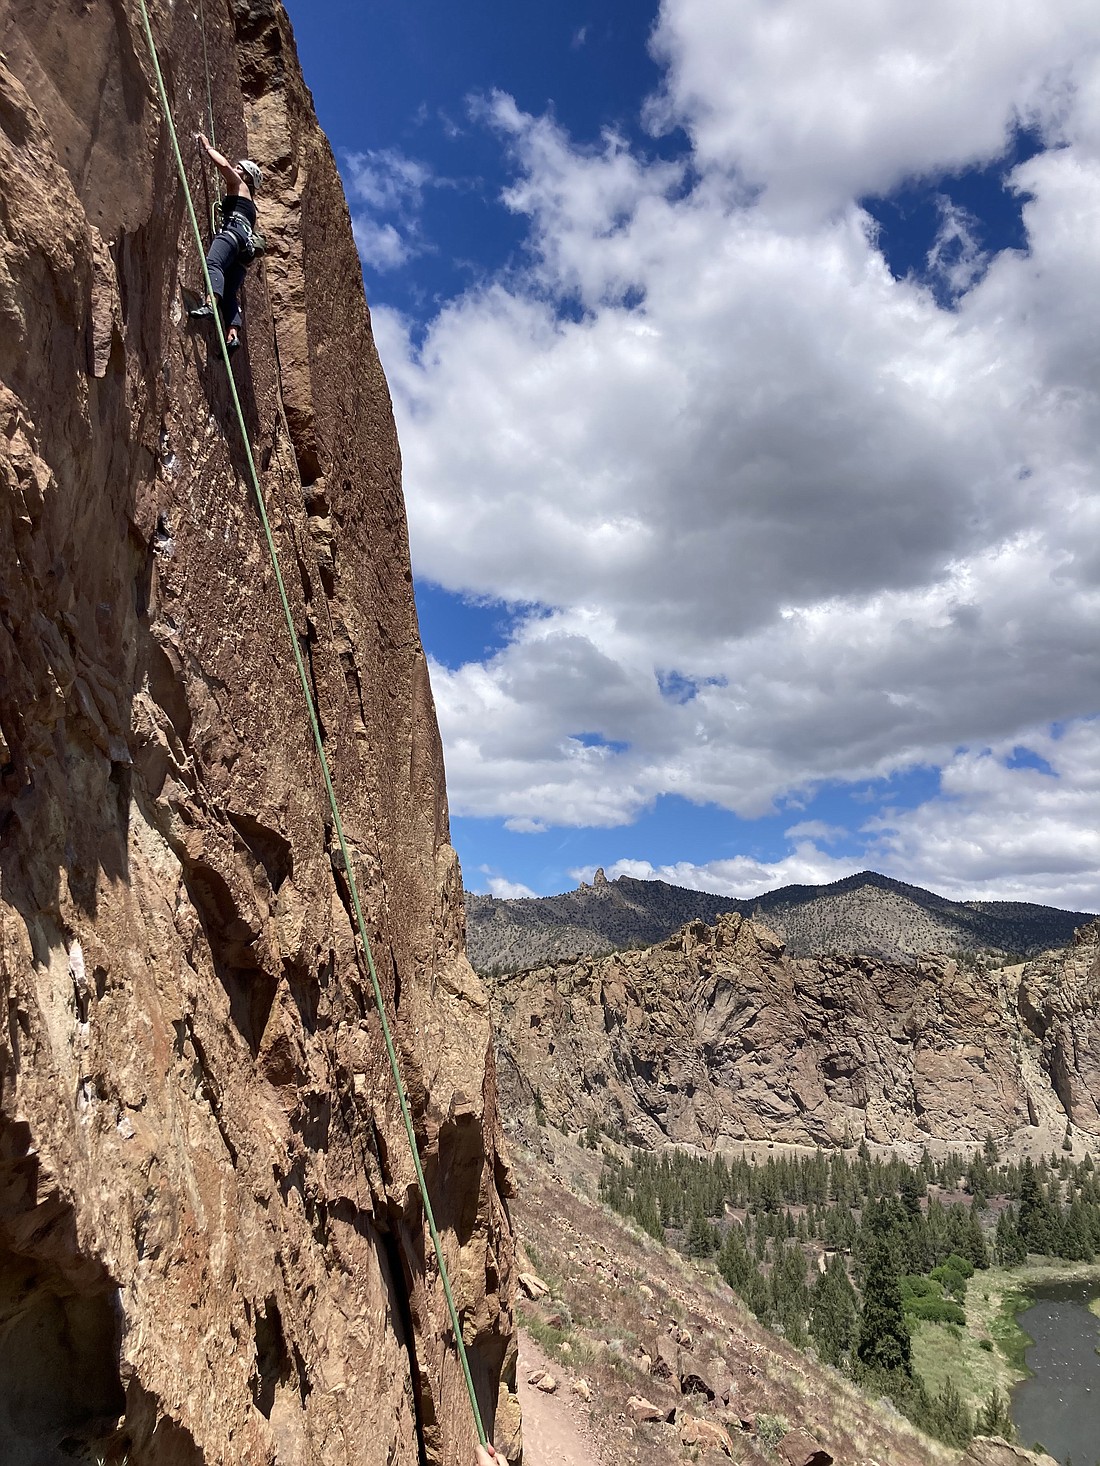 Climbers scale a face at Central Oregon's Smith Rock State Park.